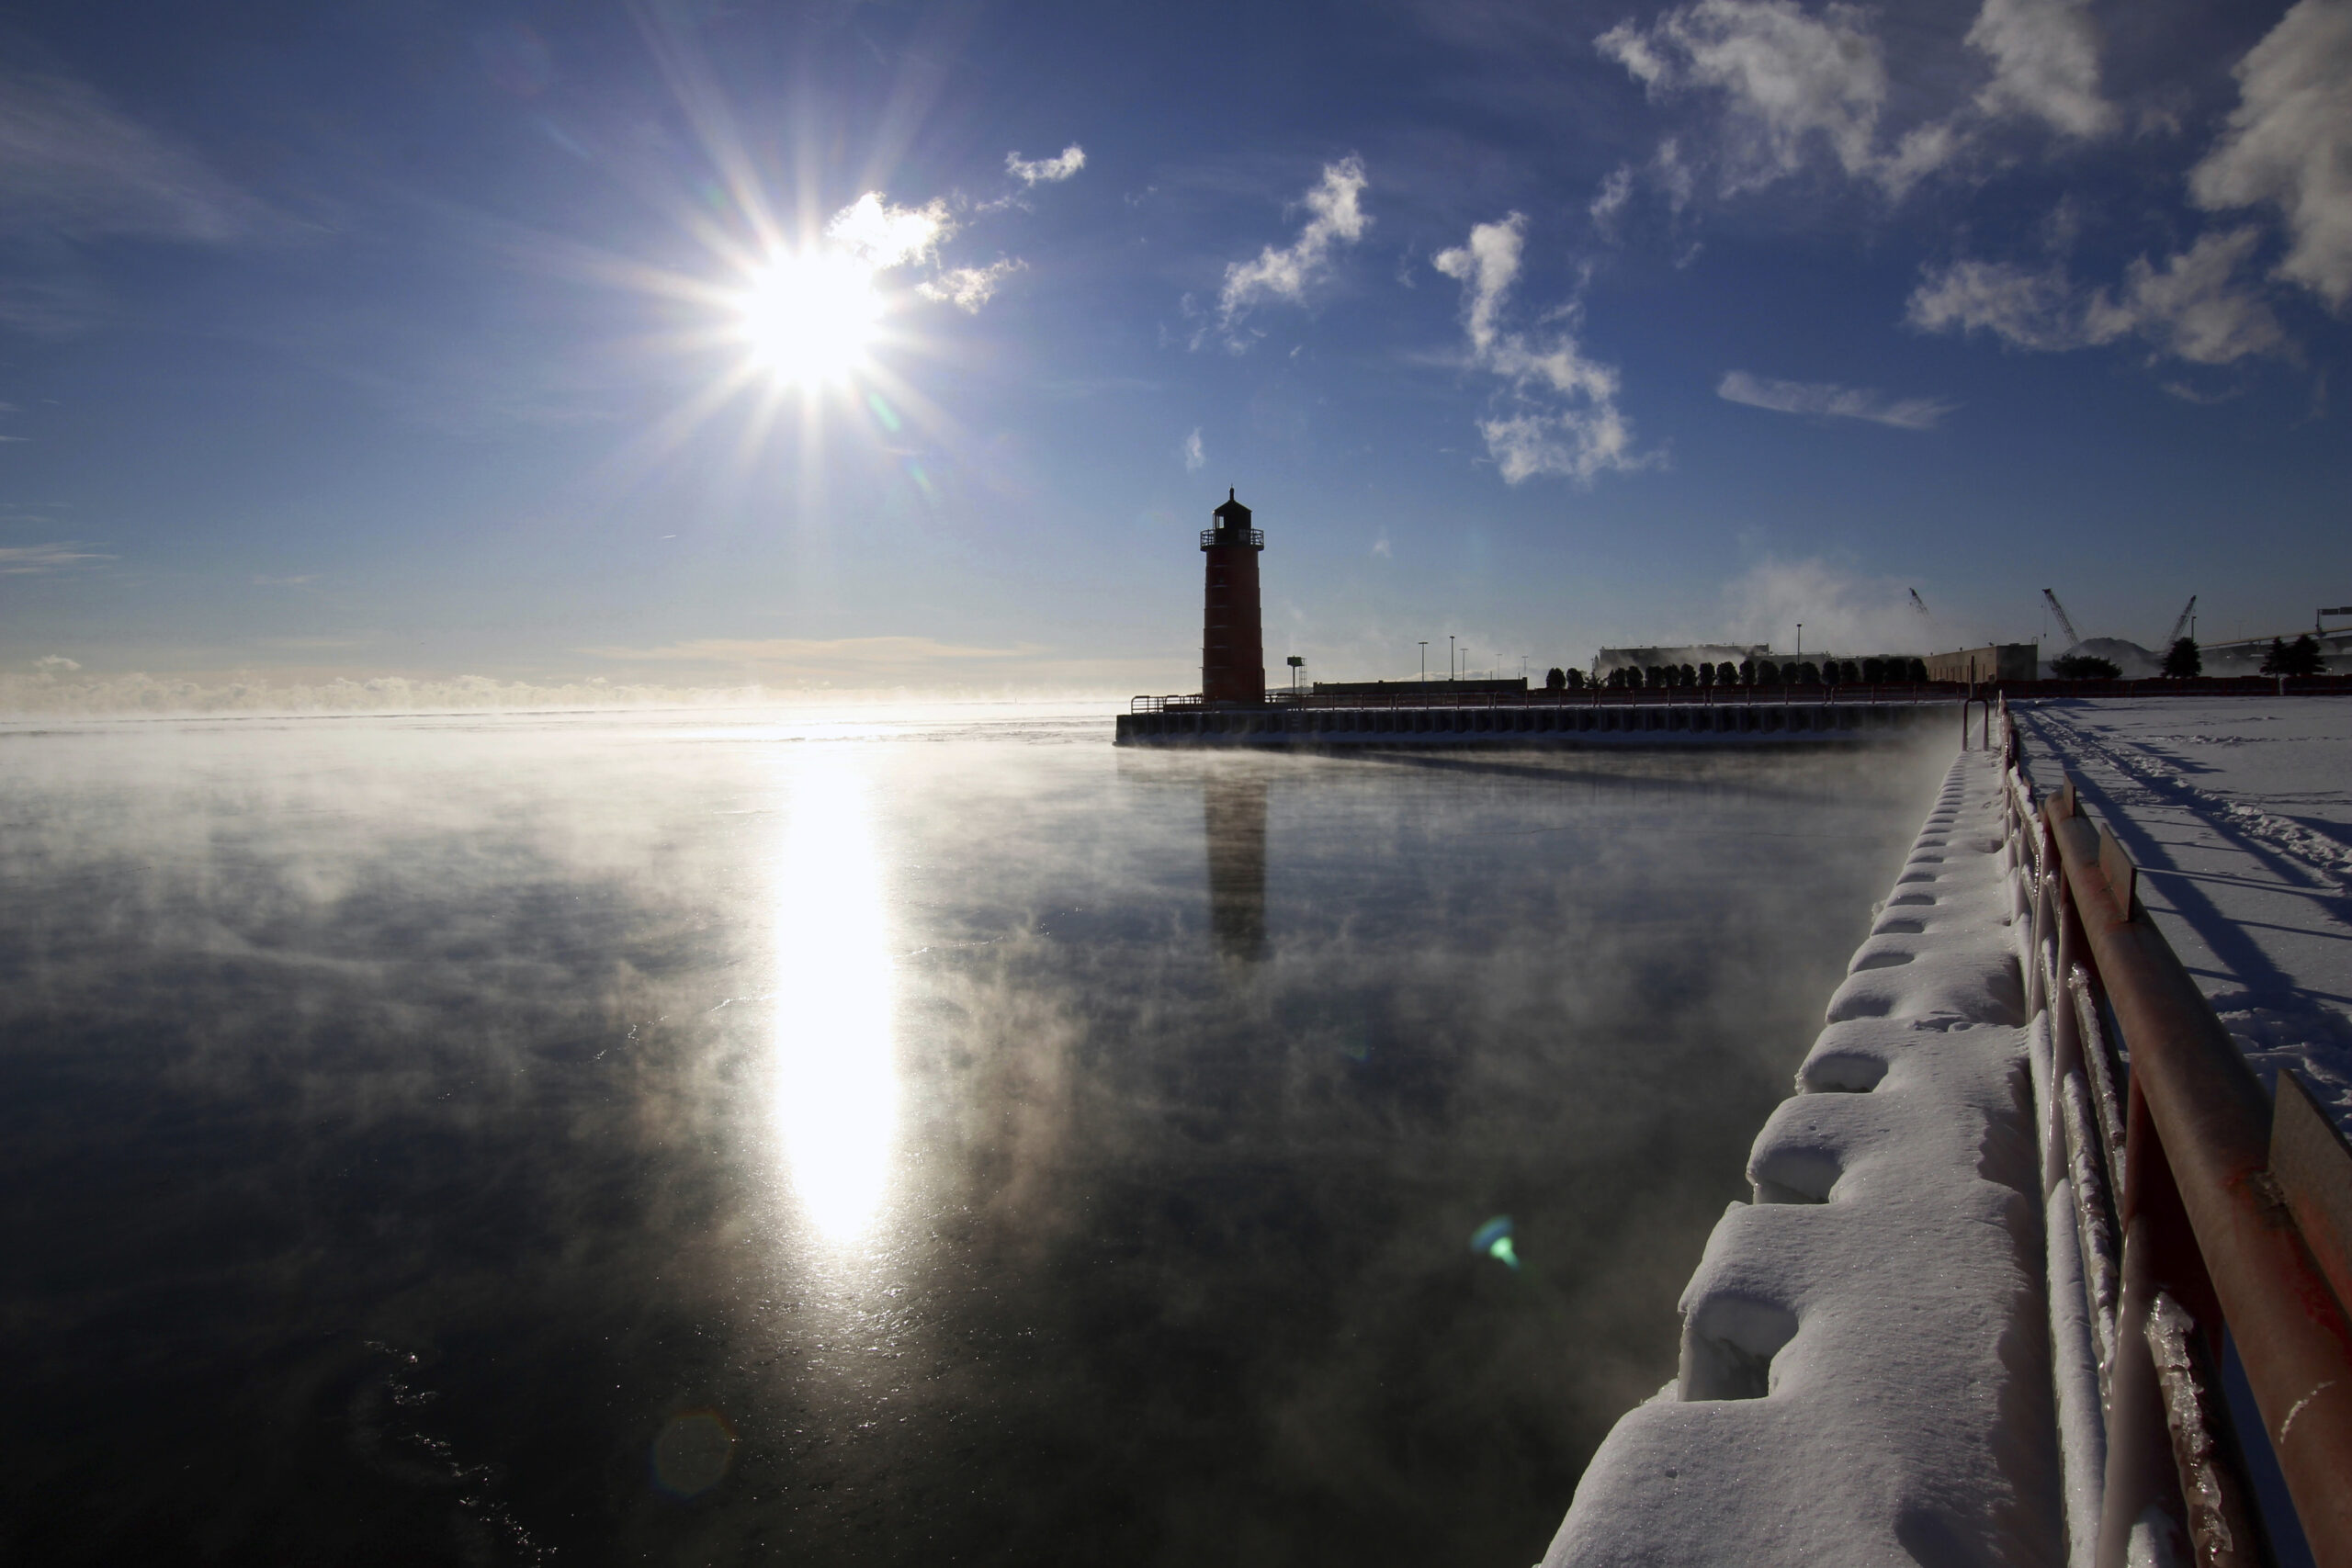 Steam rises from Lake Michigan during a cold winter day